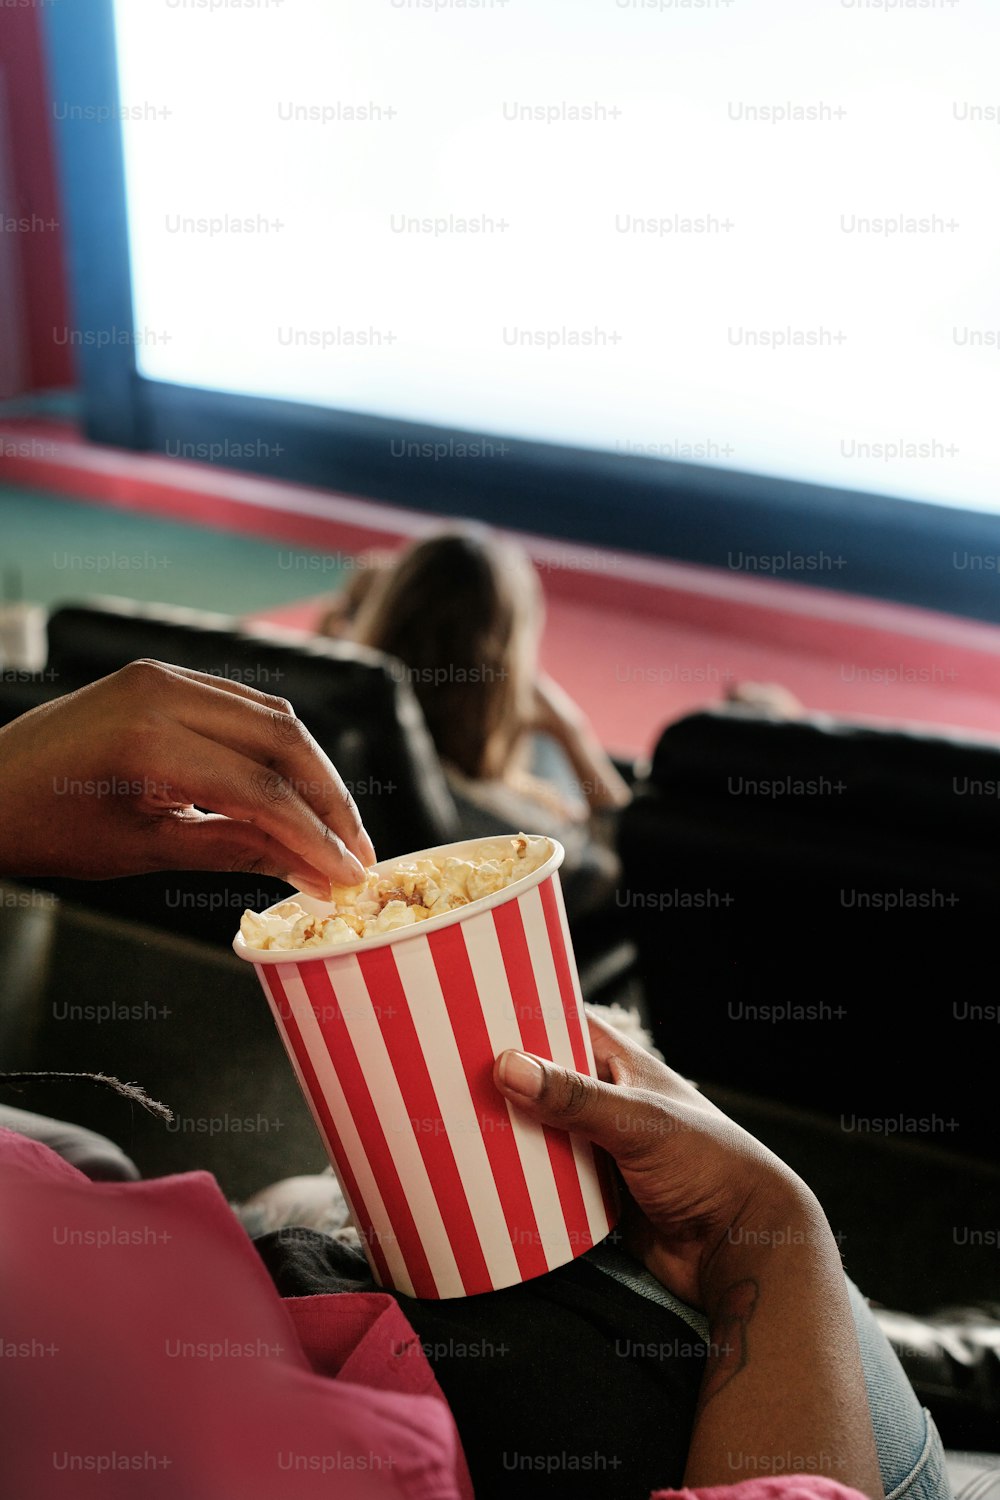 a person holding a cup of popcorn in their hand